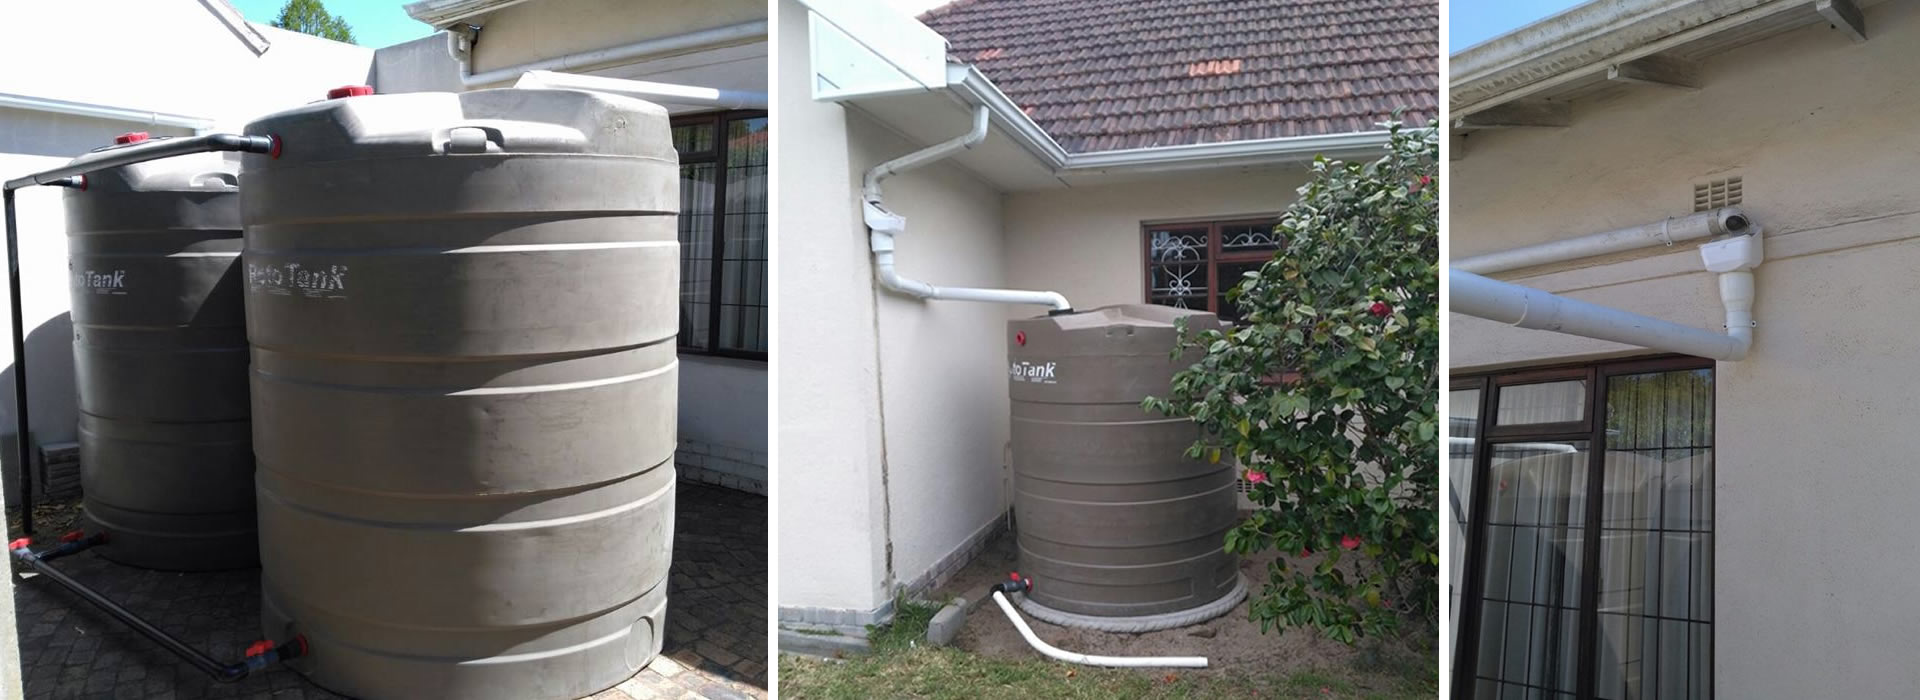 How To Filter Rainwater From Roof